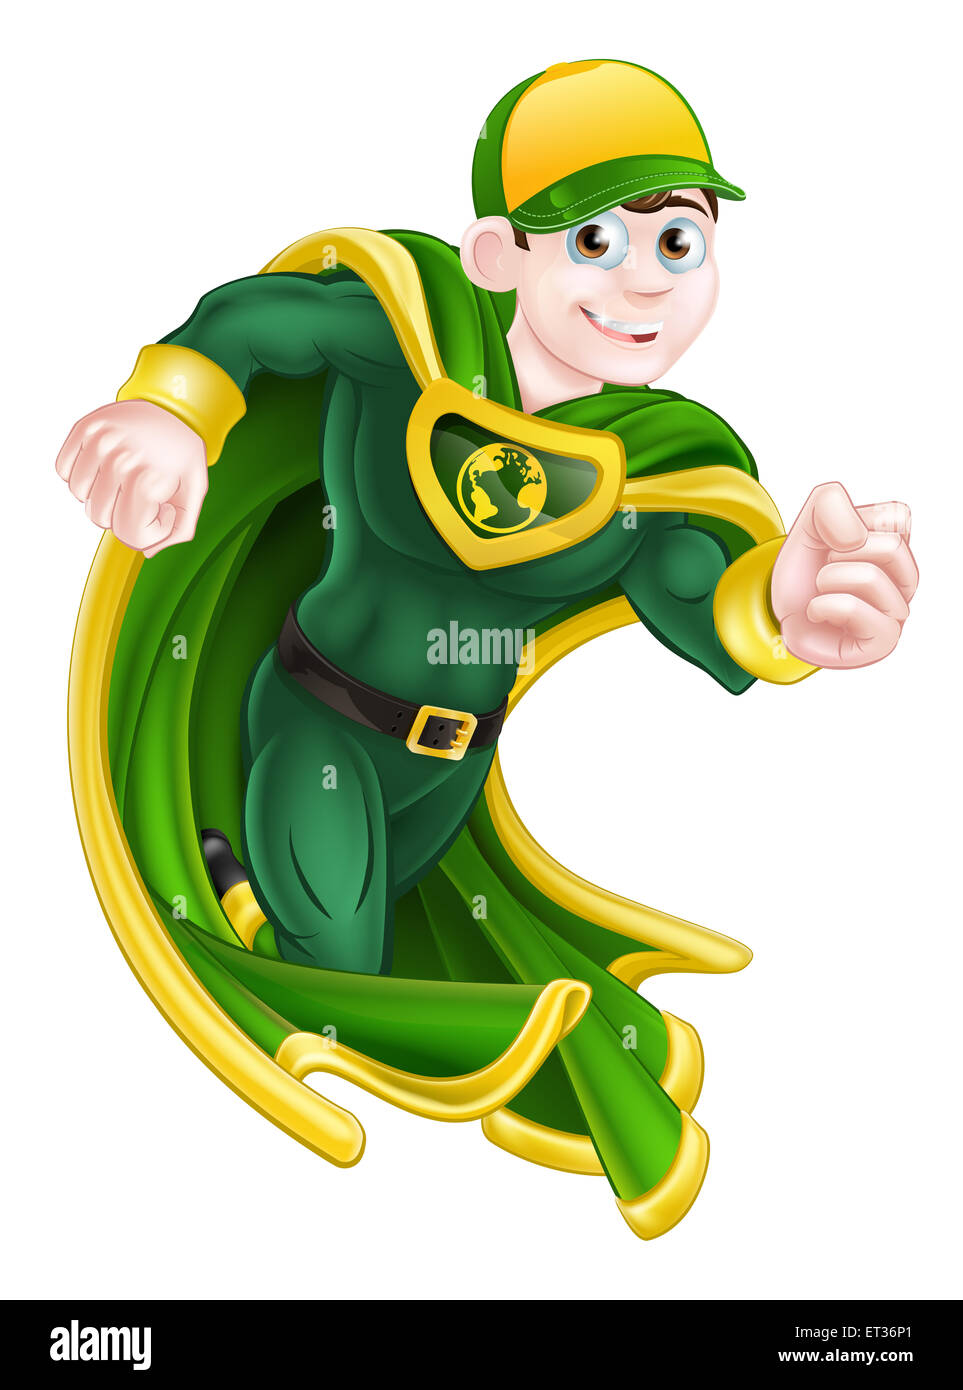 Cartoon super hero character in green and yellow running in a cape and costume and with an earth globe symbol on his chest Stock Photo